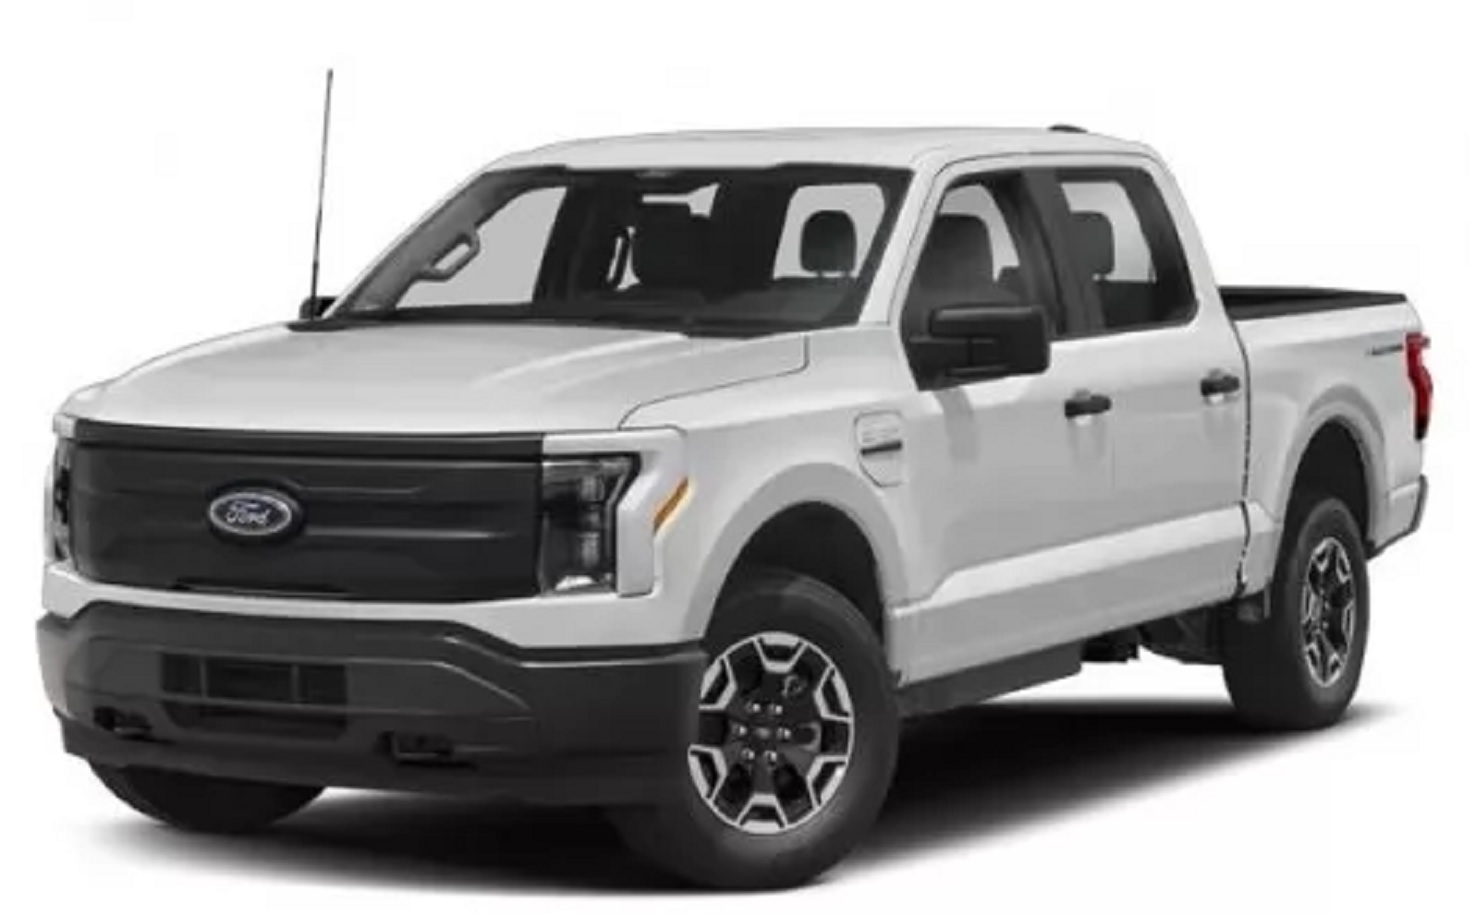 Ford F150 Lightning Lariat Car Prices, Specifications, Interior Exterior World Car Price